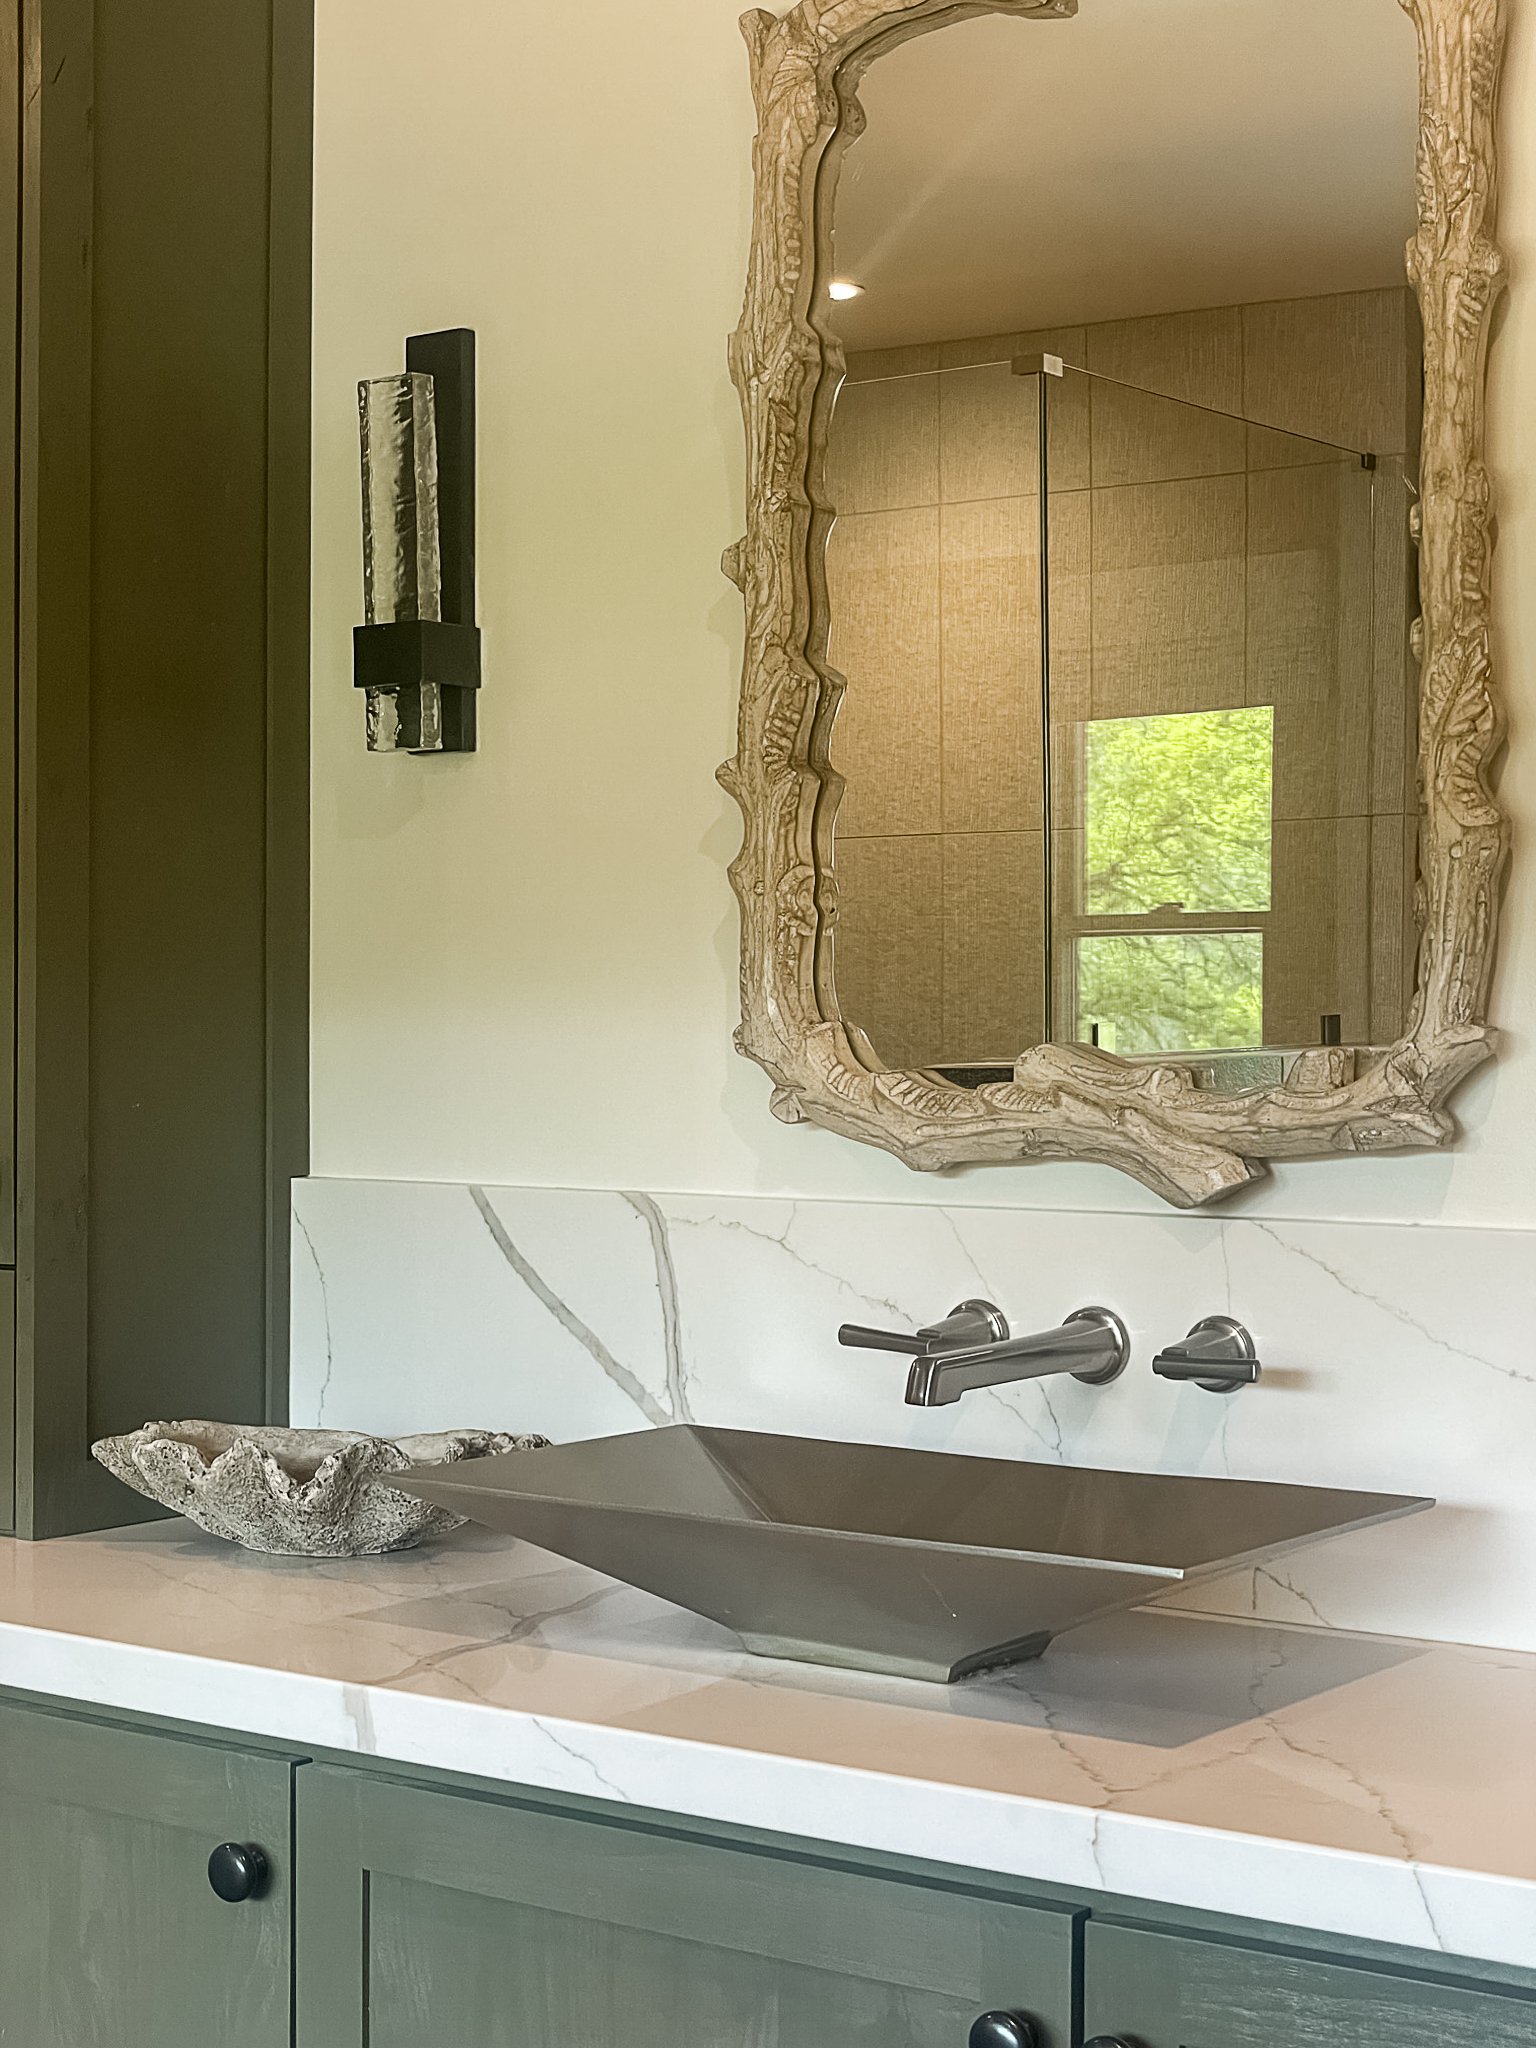  A bathroom with a wood framed mirror, marble countertop, square bowl style sink, seashell soap holder, and green cabinets. 